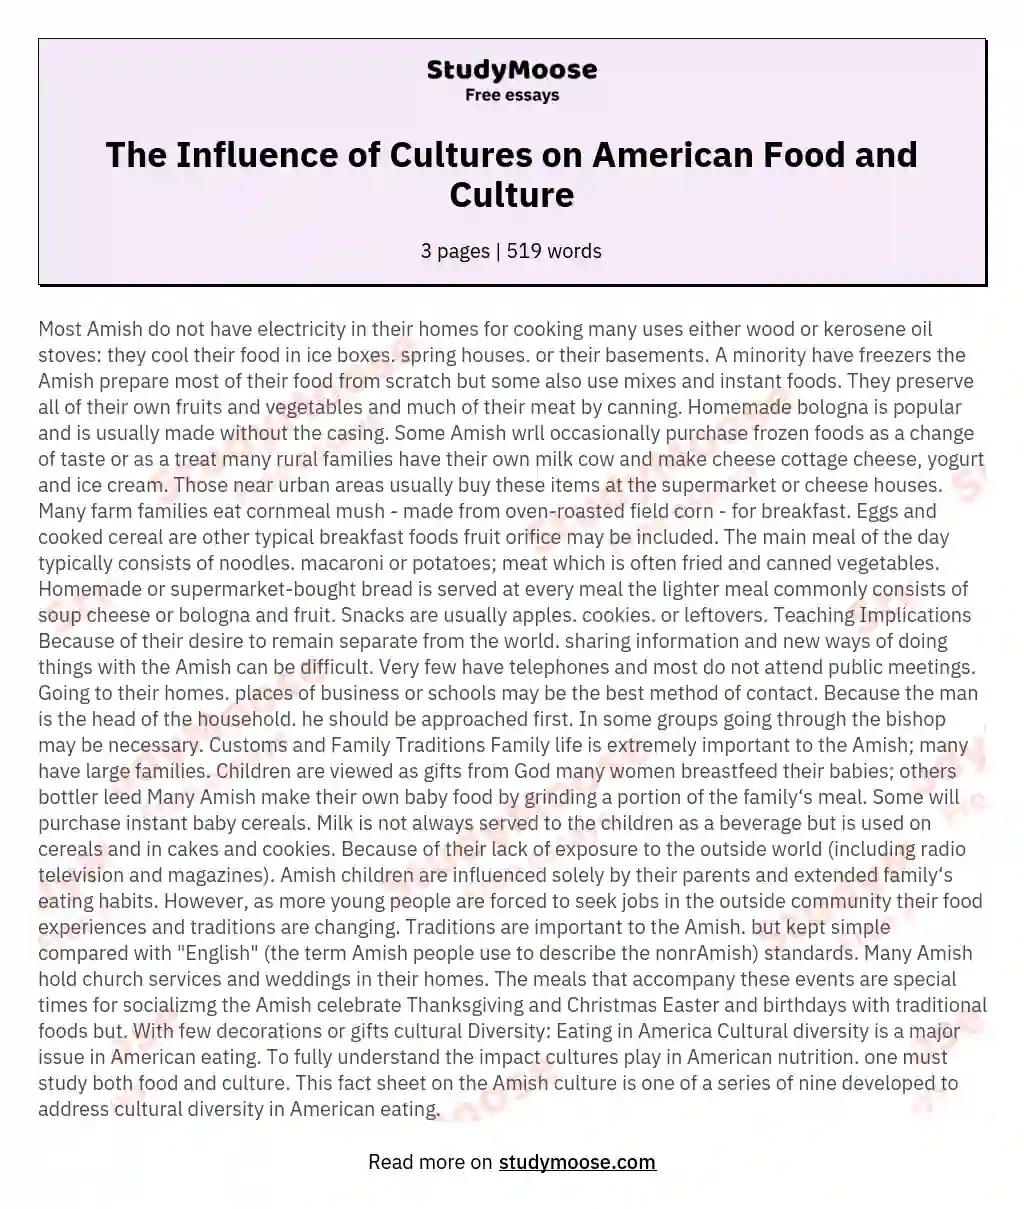 The Influence of Cultures on American Food and Culture essay